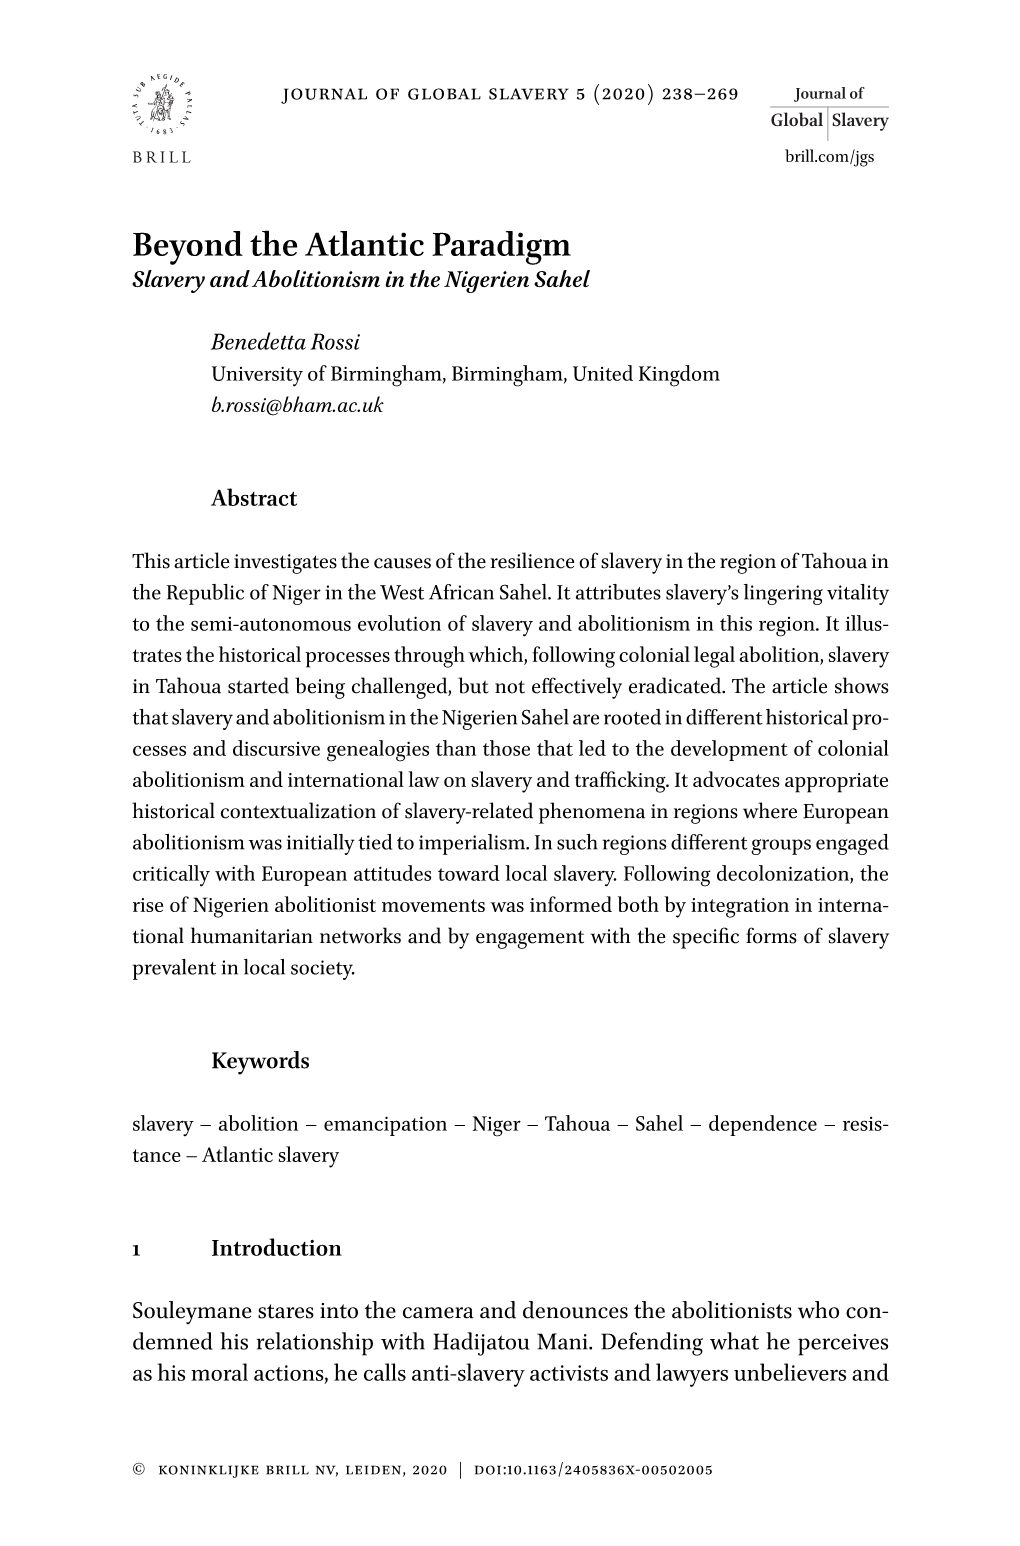 Beyond the Atlantic Paradigm Slavery and Abolitionism in the Nigerien Sahel